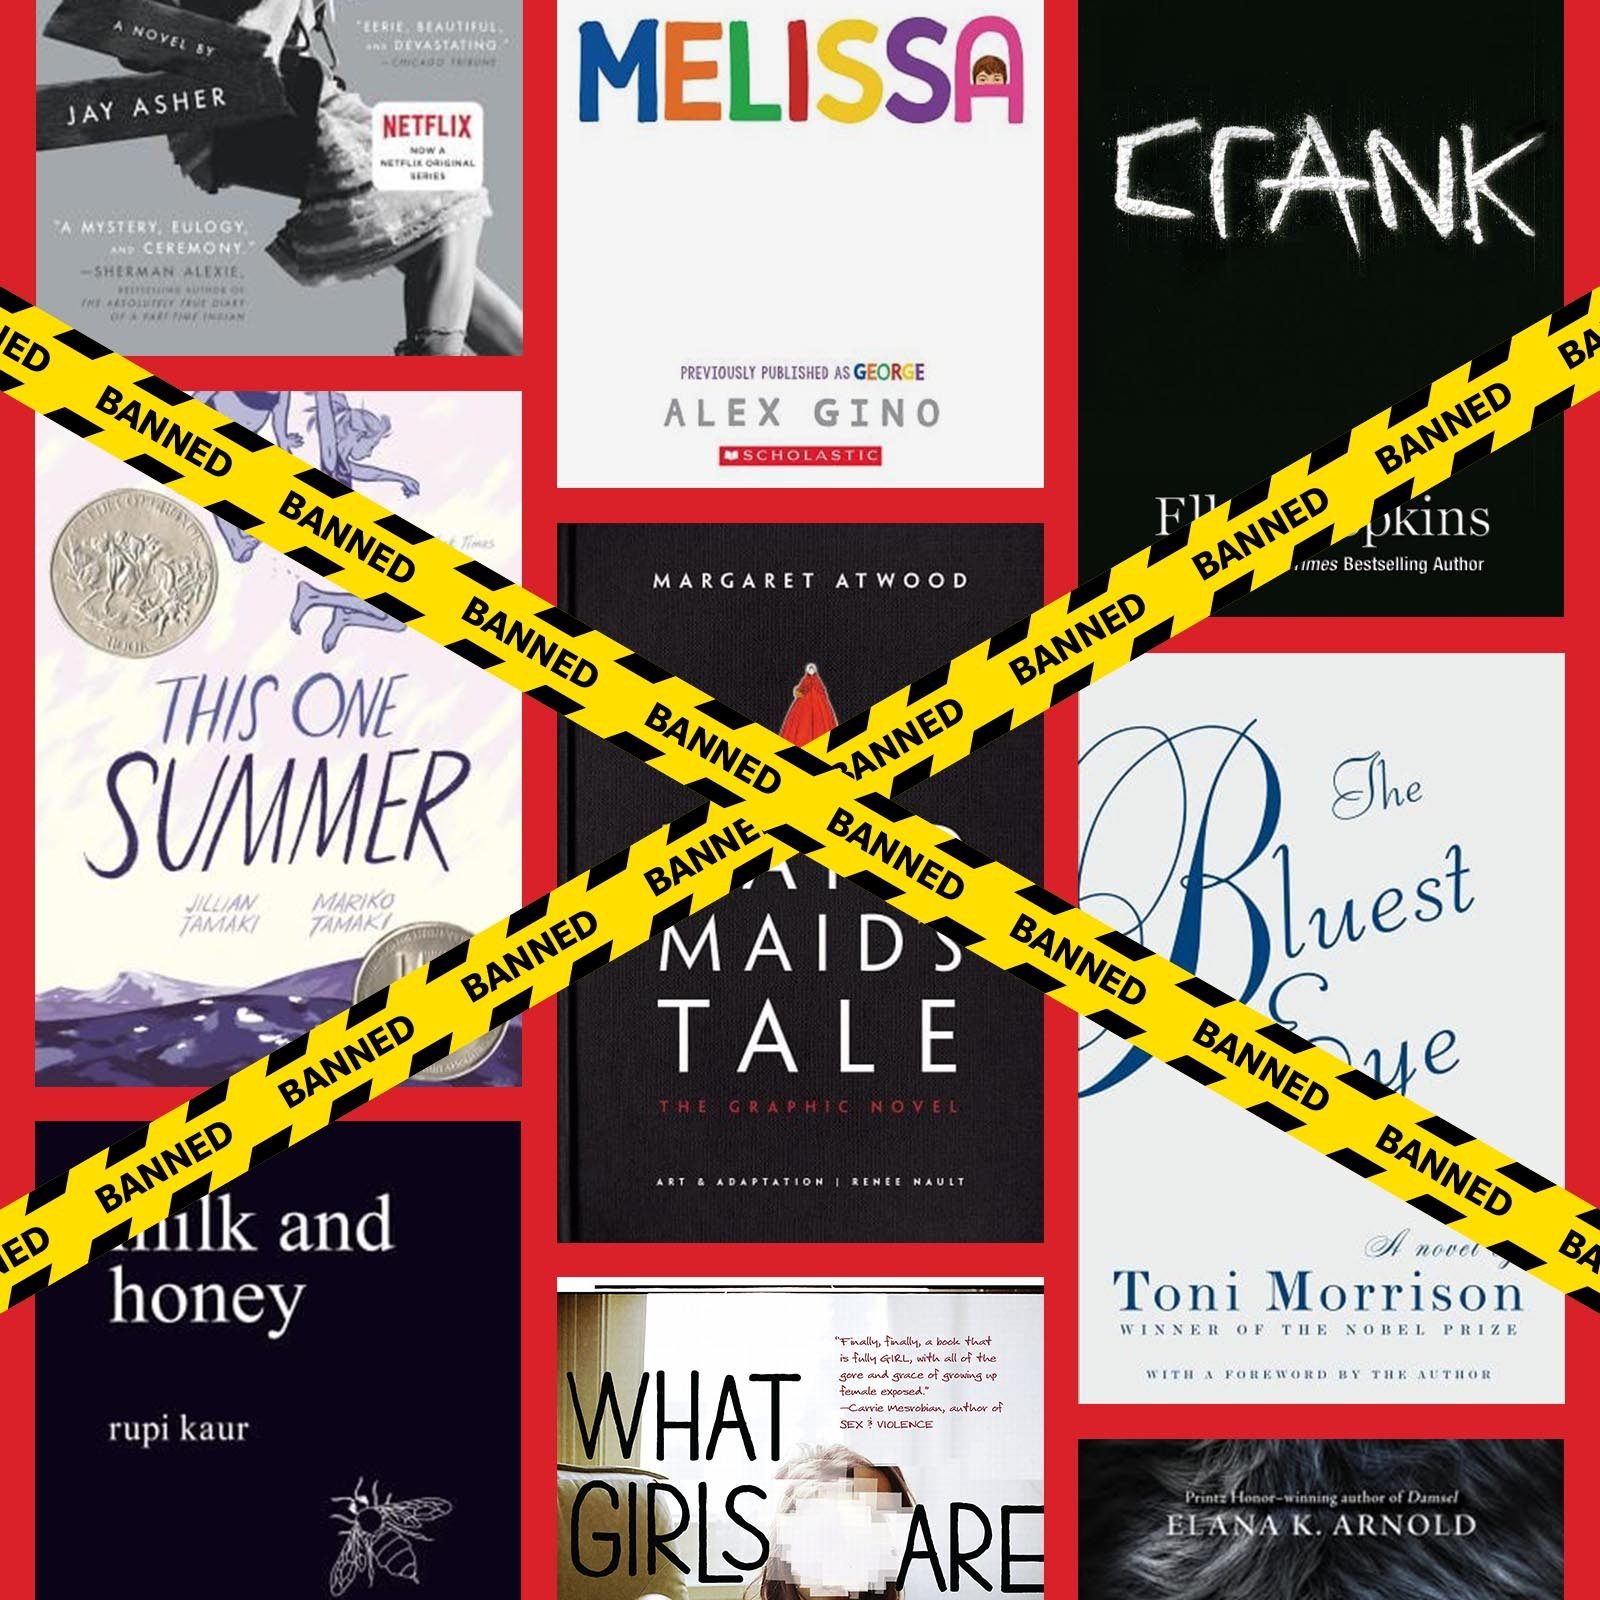 The 50 Most Banned Books in America 2023 How Many Have You Read? pic